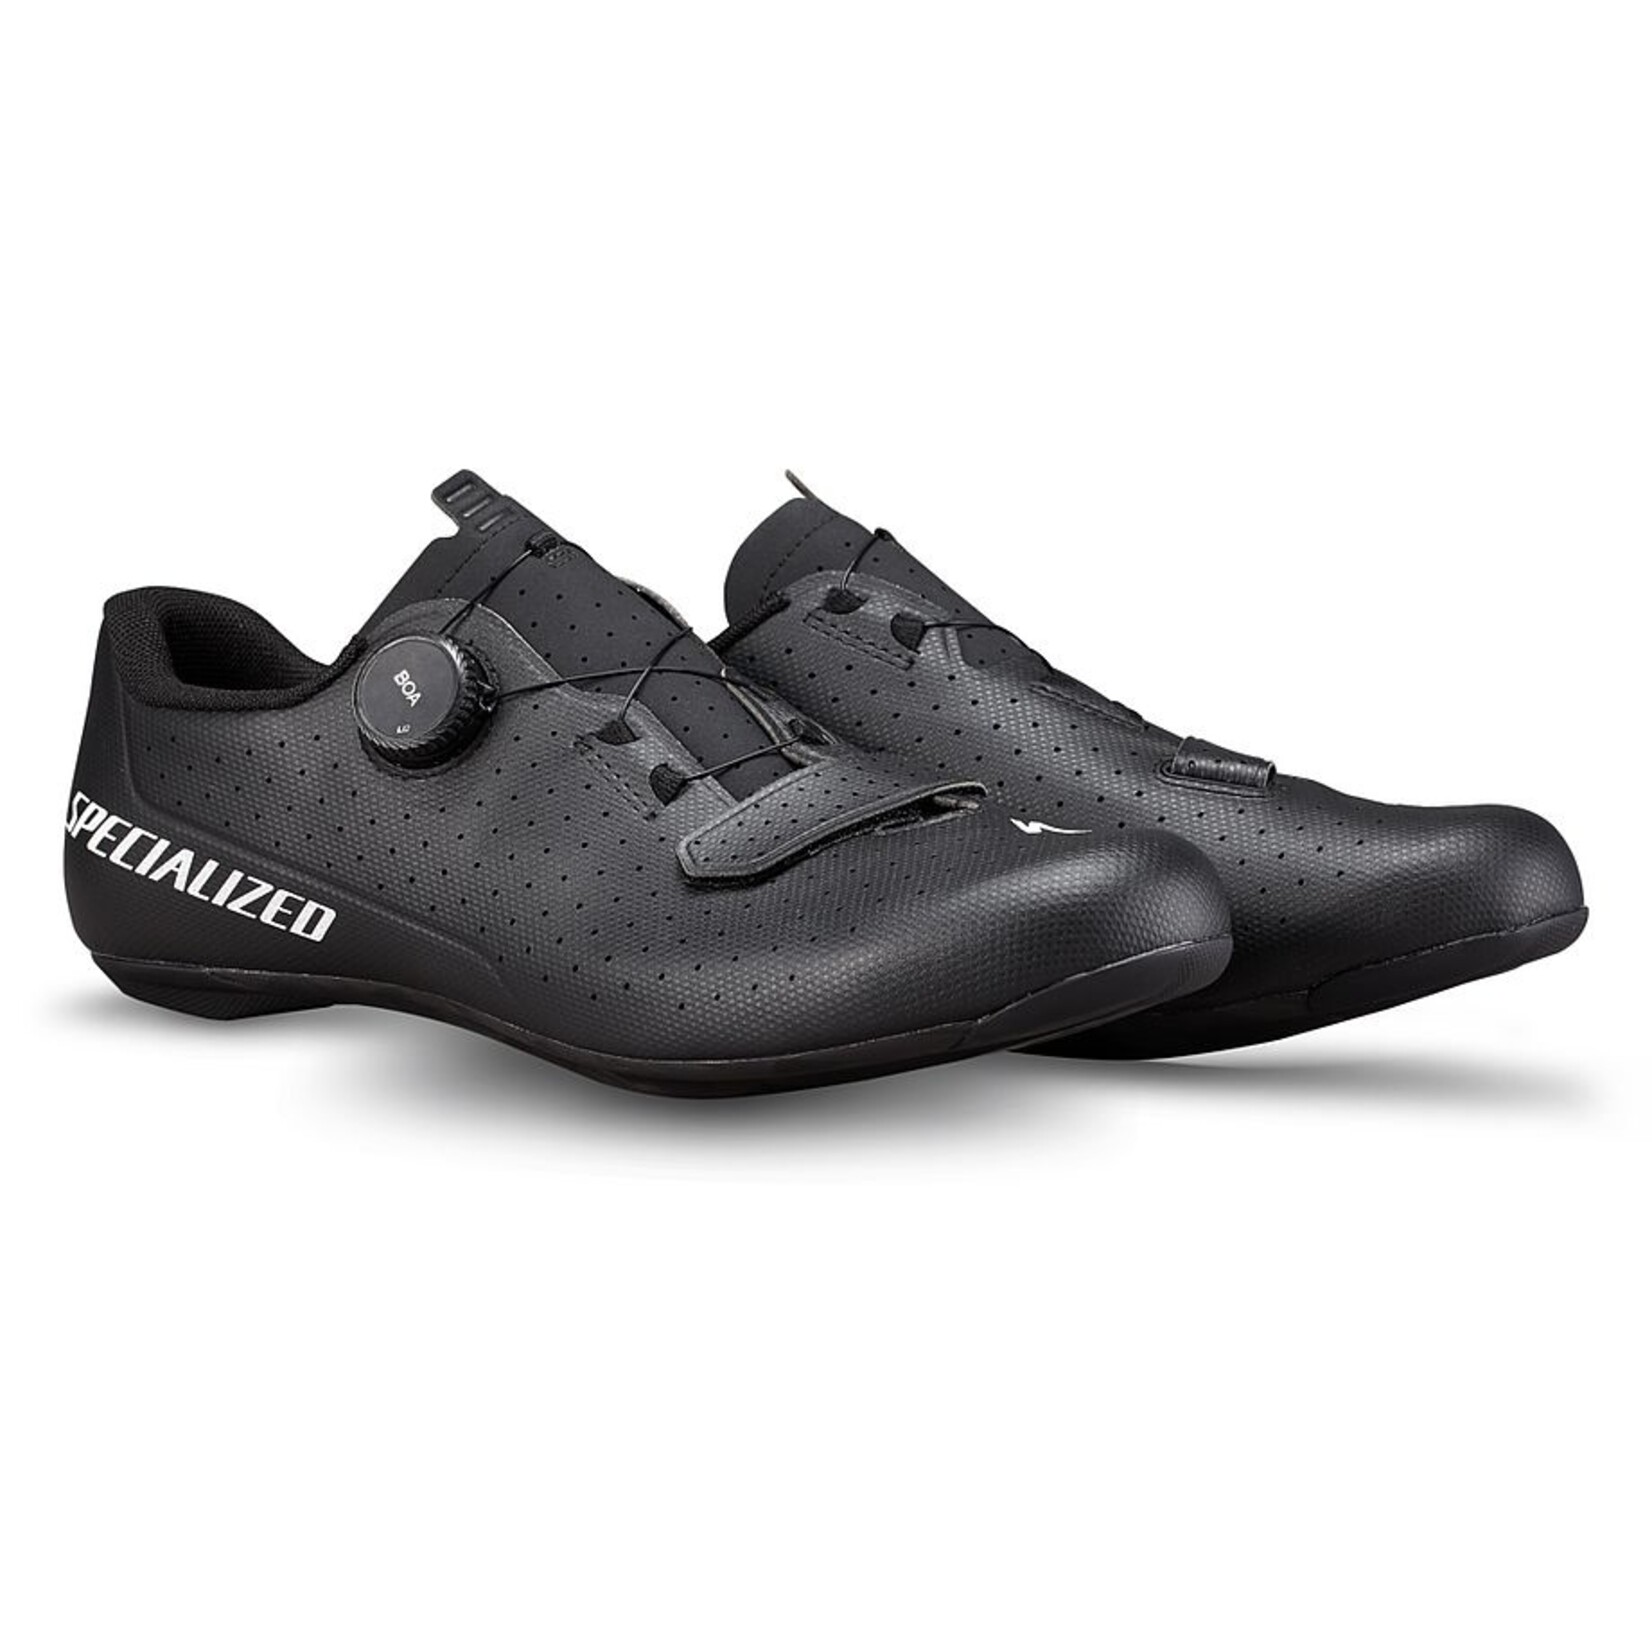 Specialized Torch 2.0 Road Shoes in Black